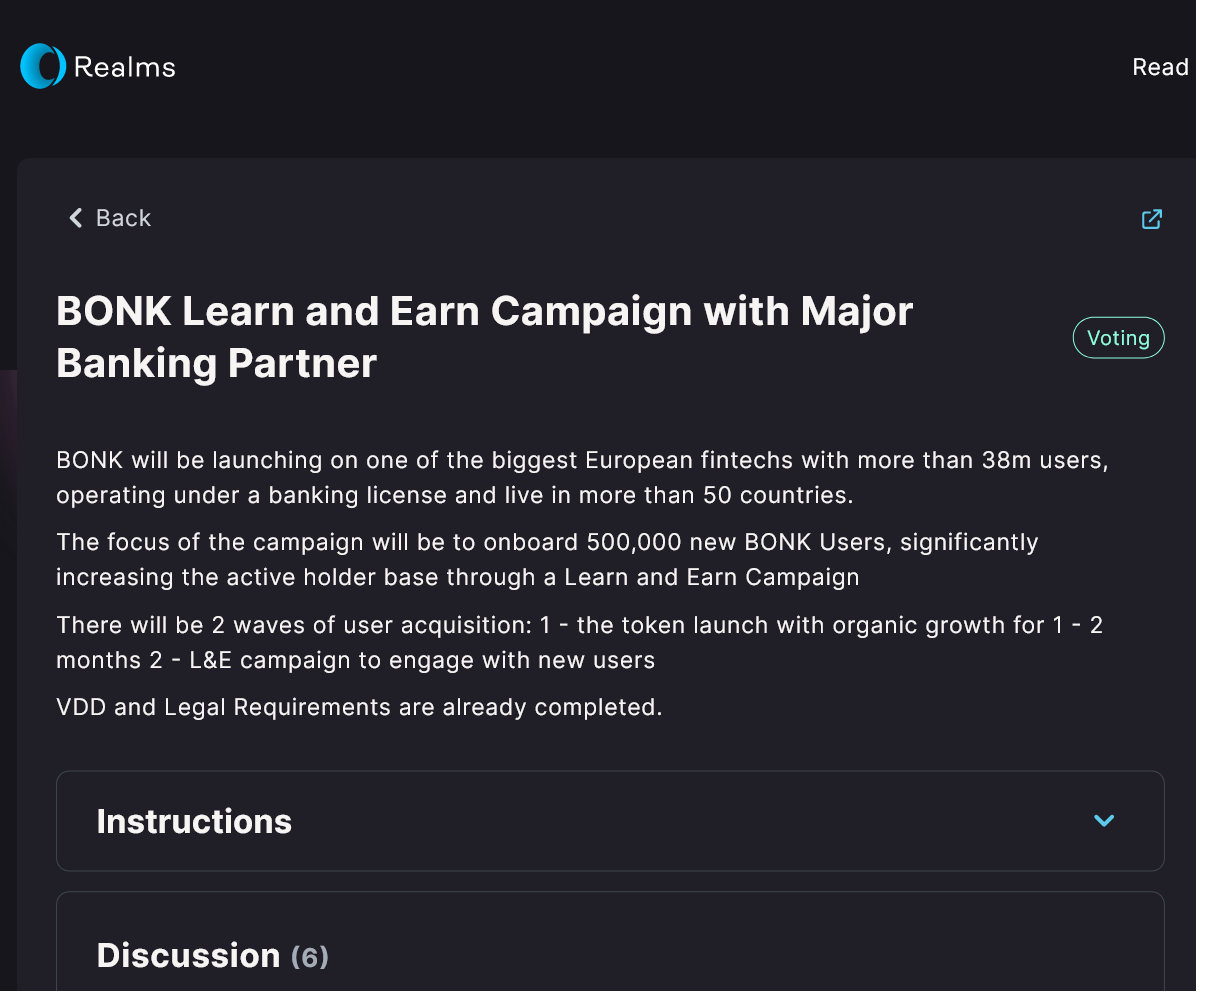 Details of BONK’s Learn and Earn Campaign with Revolut